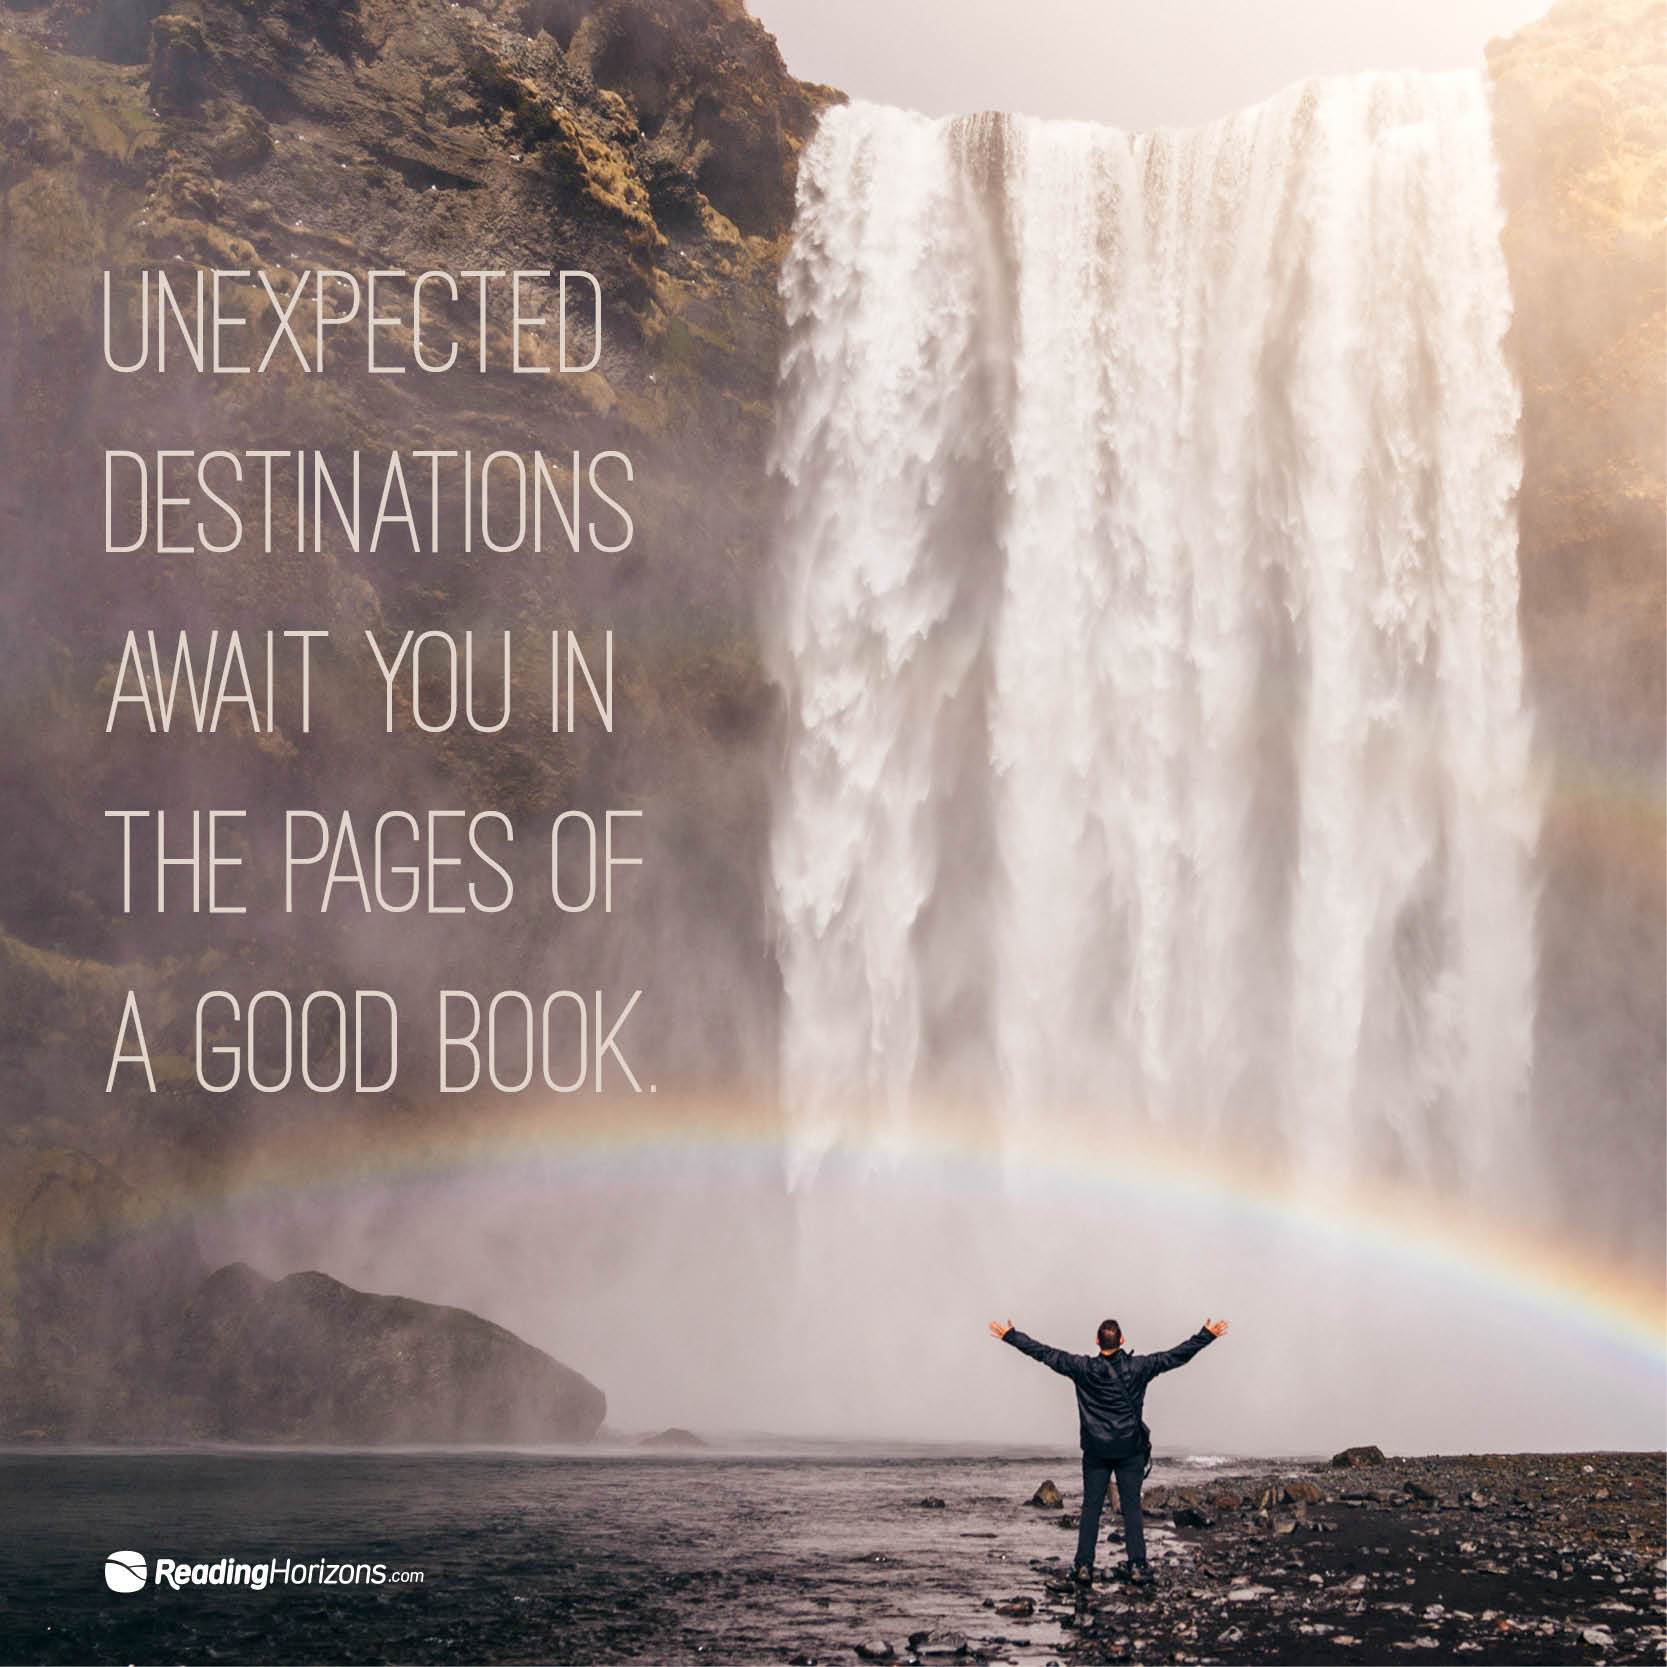 A meme of a man standing in front of a waterfall with the words "Unexpected destinations await you in the pages of a good book."